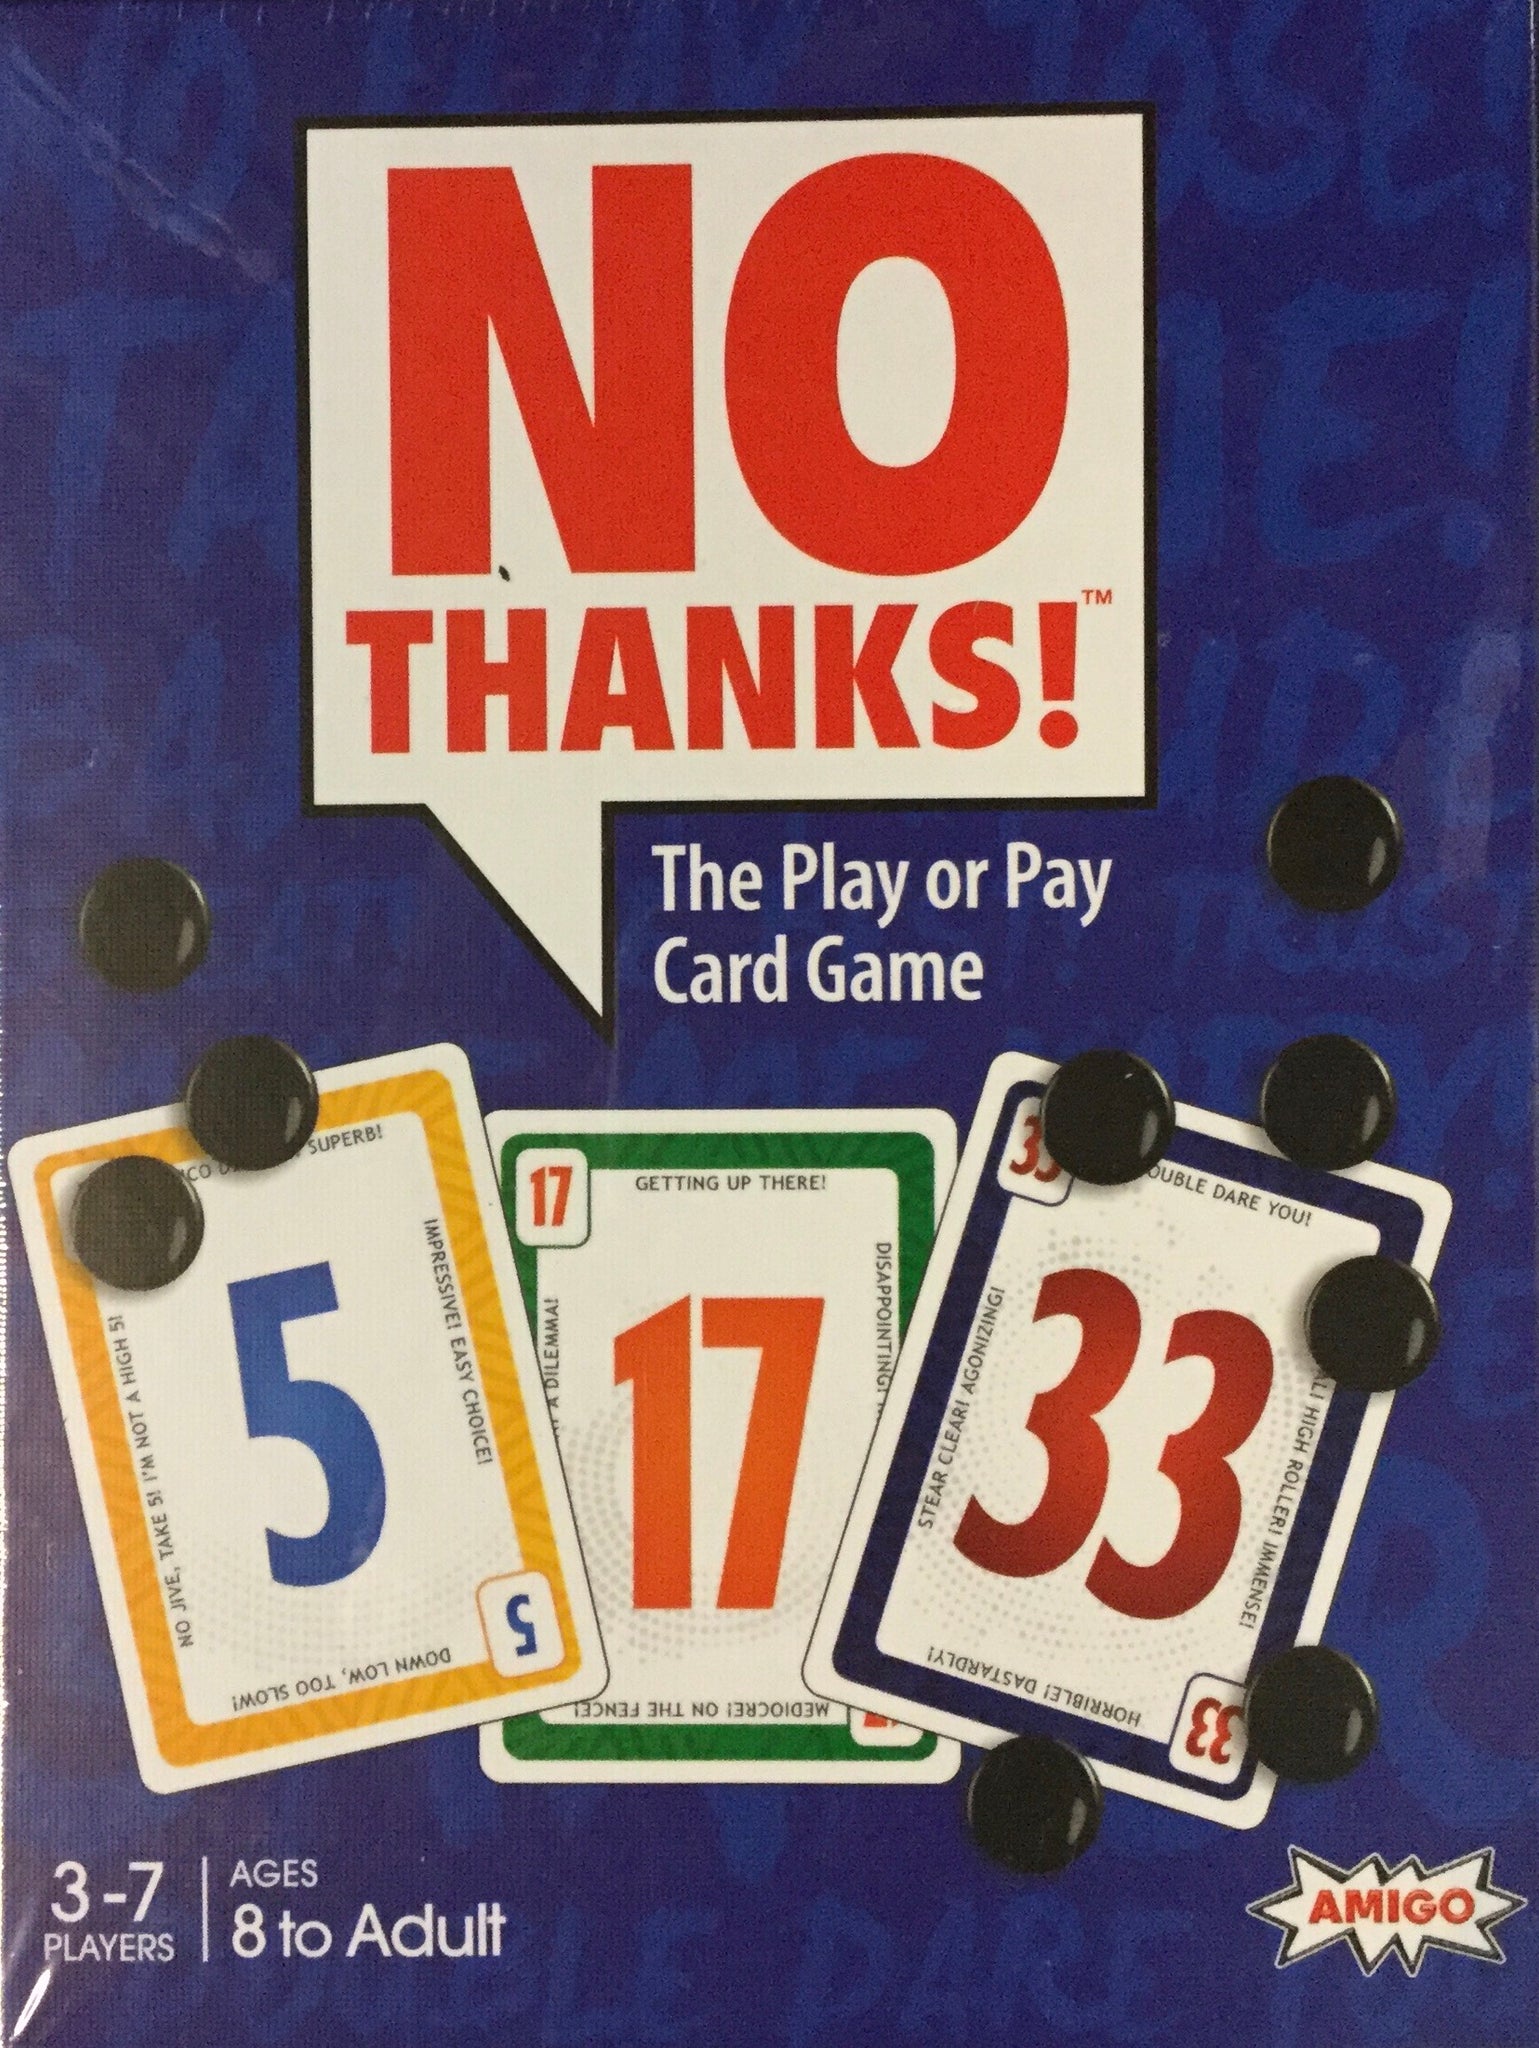 No thanks!- Card Game